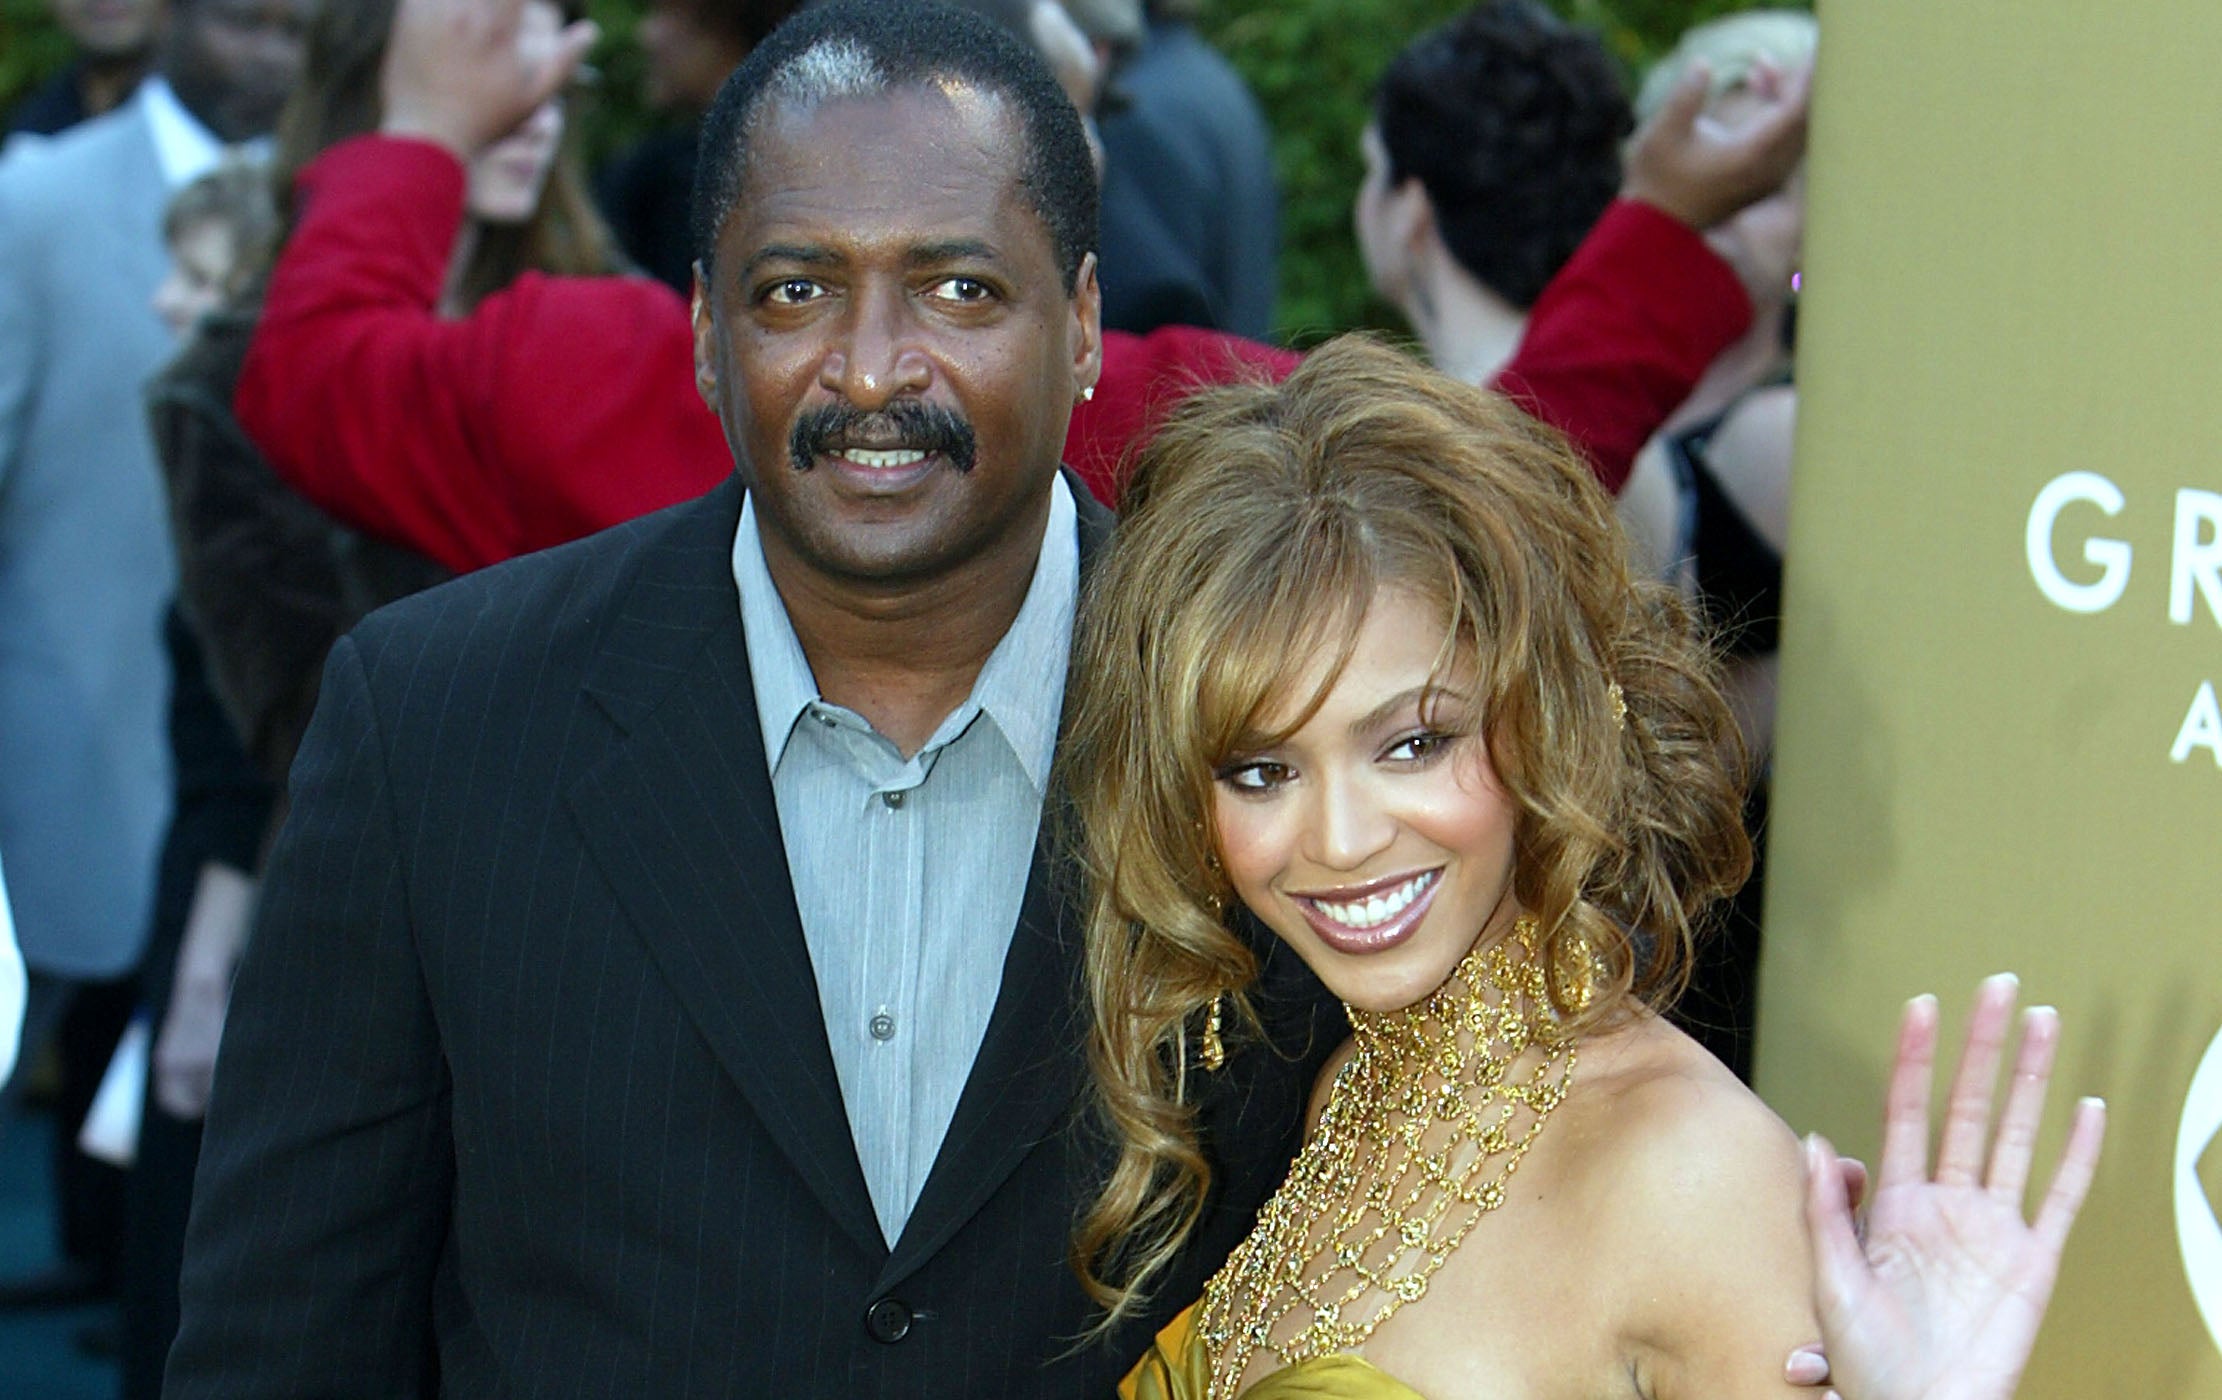 Mathew Knowles, Beyonce's father and former manager, has said that the life incident with her sister Solange was a "Jedi mind trick"